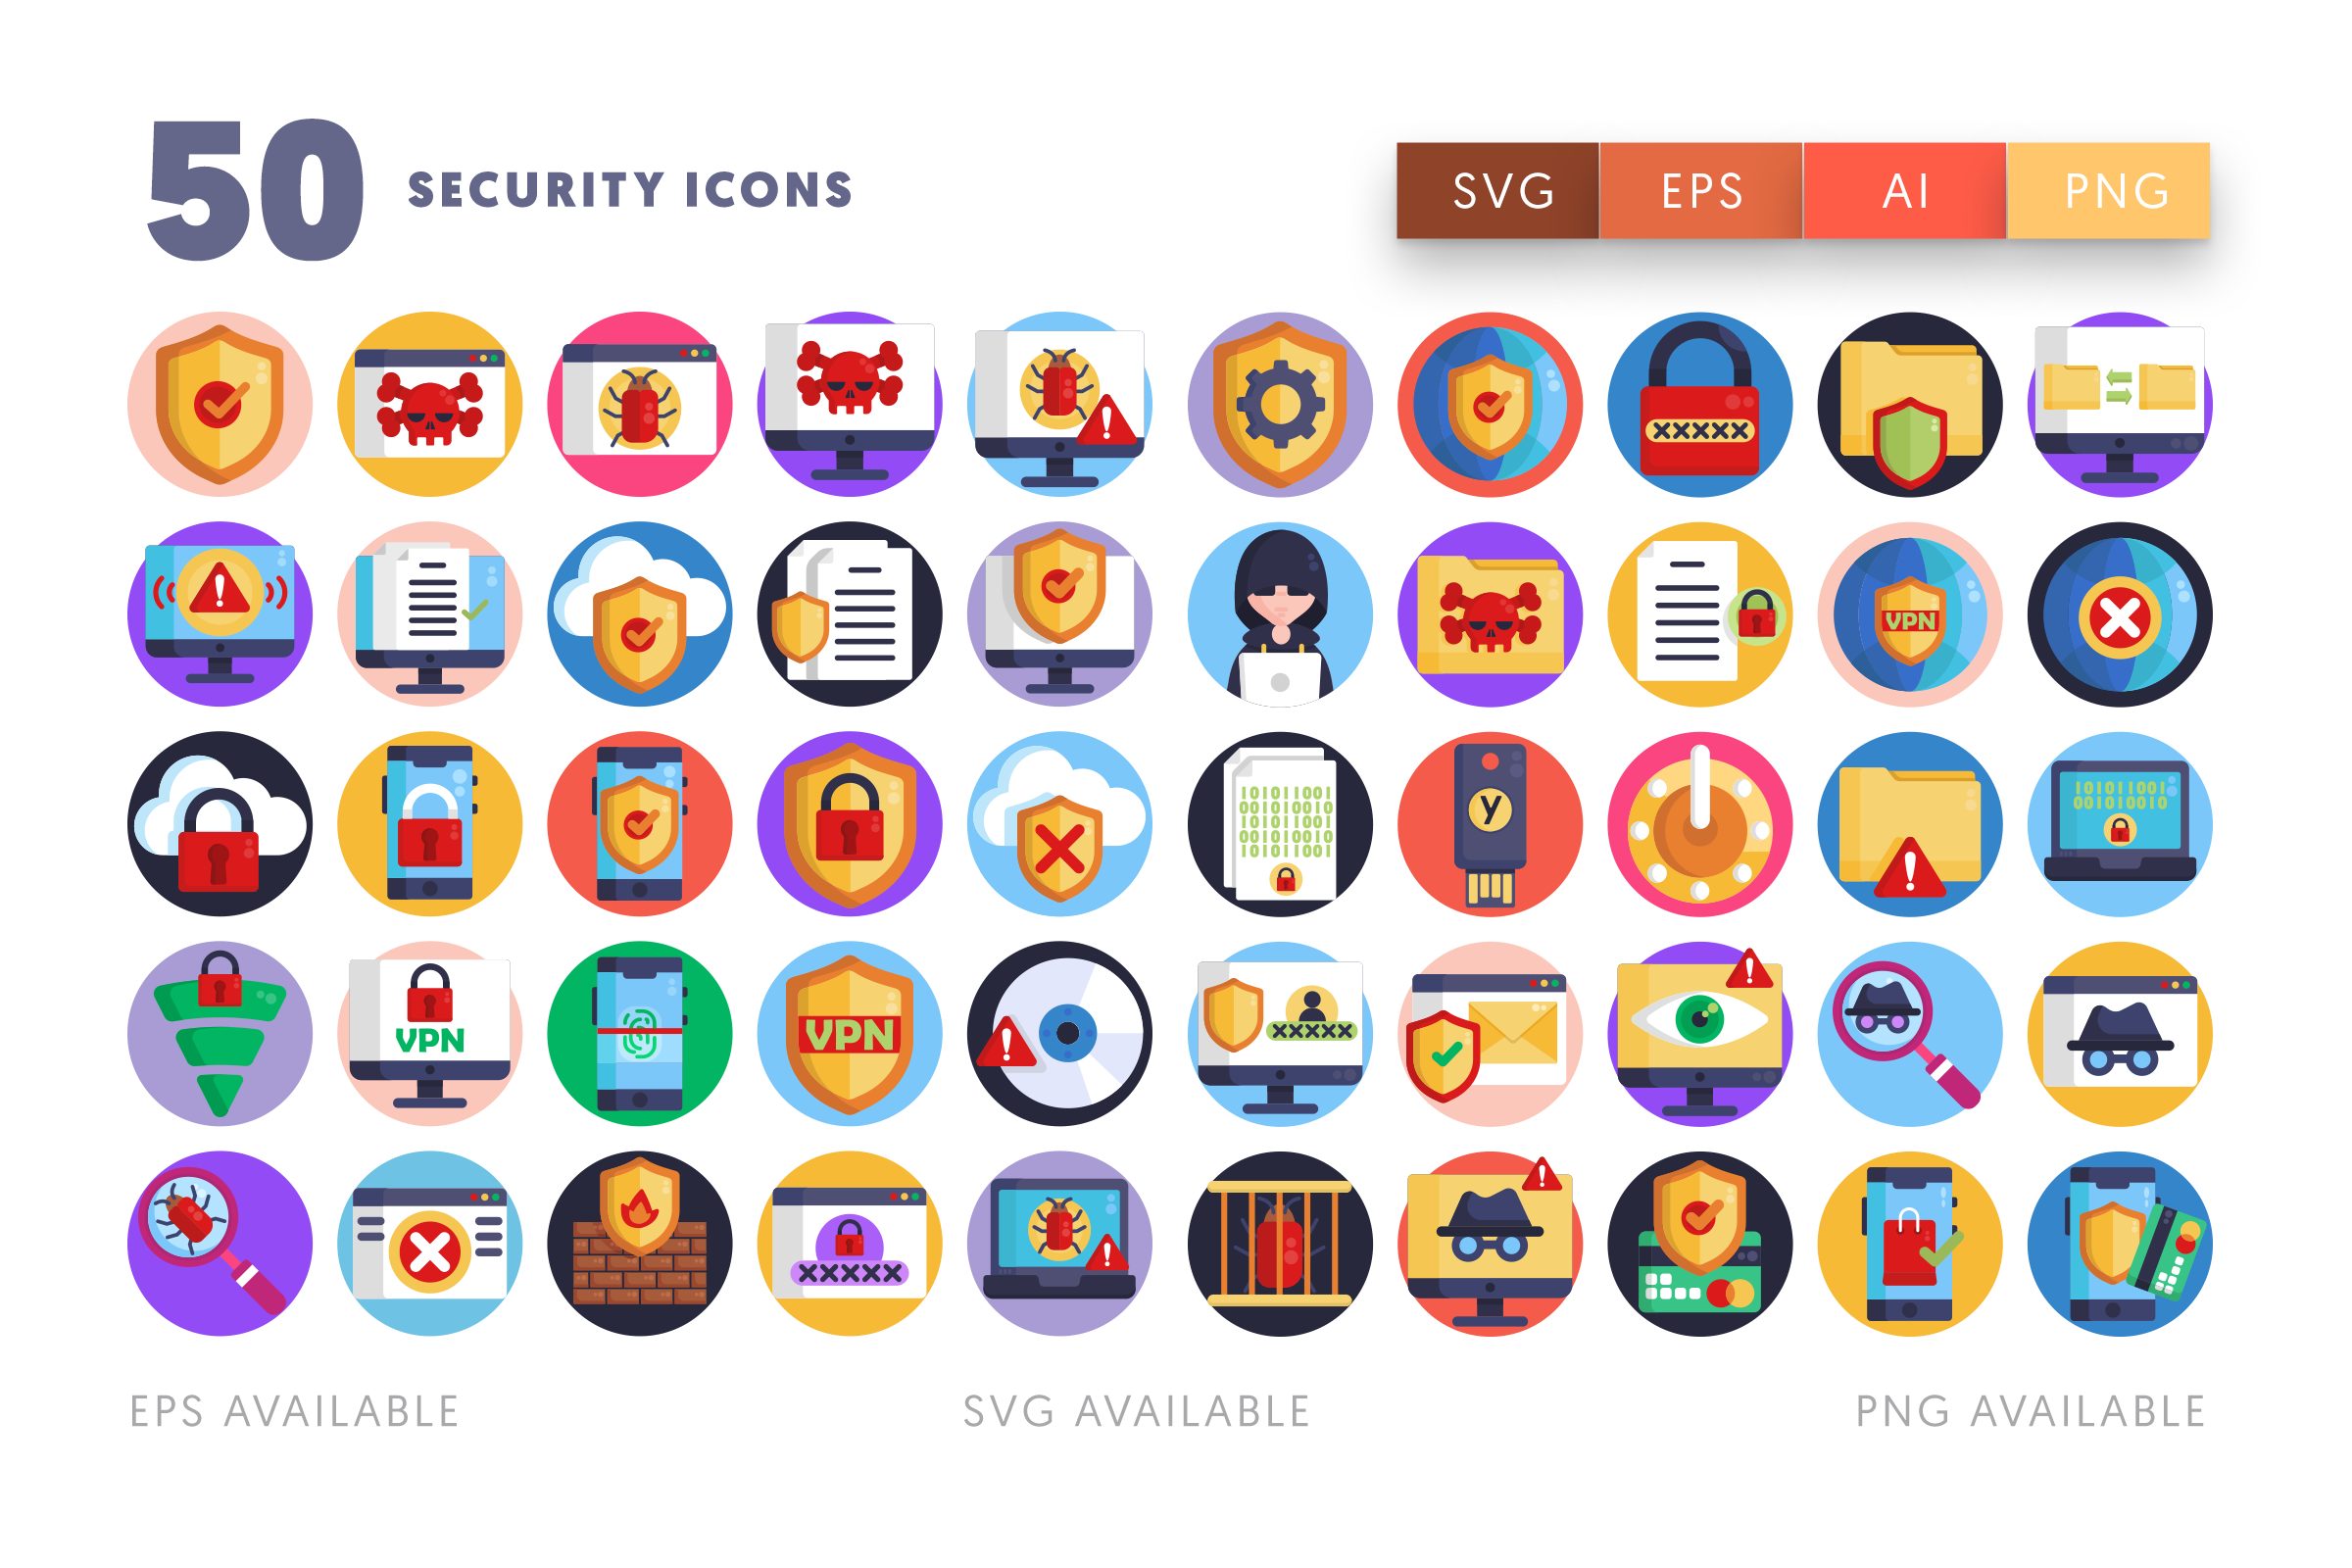 Security icons png/svg/eps